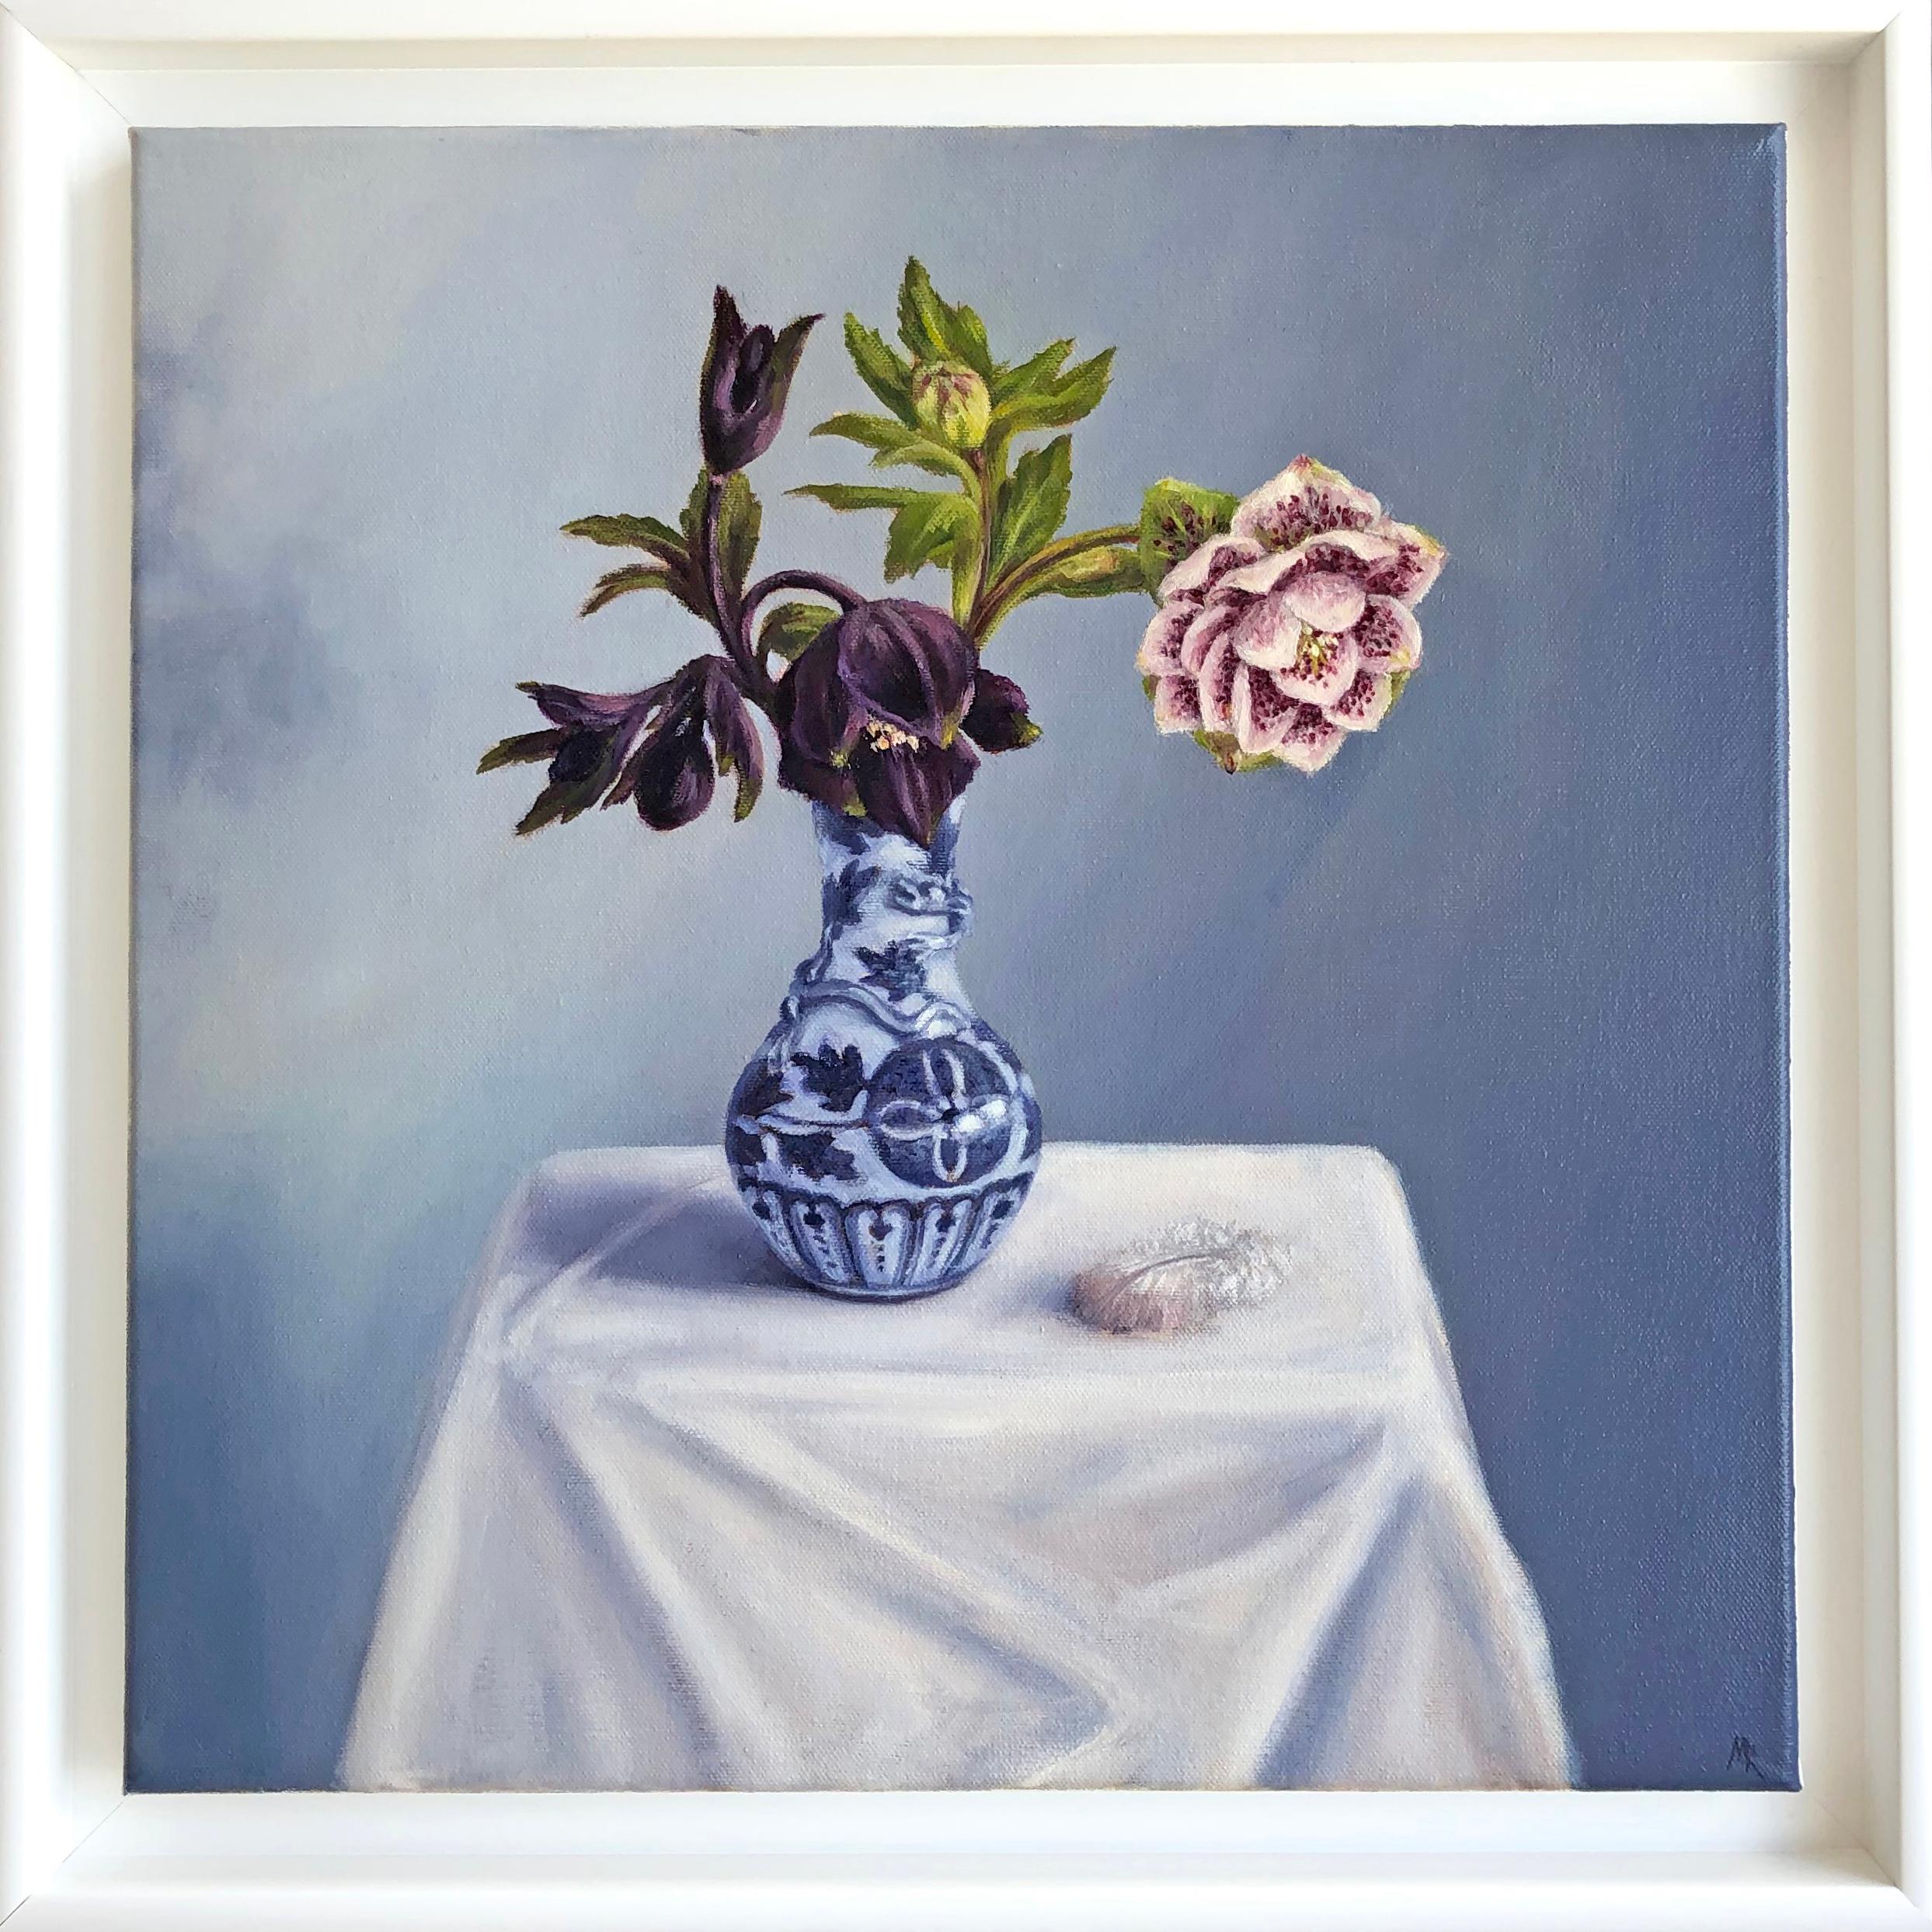 Marie Robinson
Signs of Spring
Original Still Life Painting
Oil Paint on Board
Canvas Size: H 40cm x W 40cm x D 2cm
Framed Size: H 46.5cm x W 46.5cm x D 3.5cm
Sold Framed in a White Box Frame
Please note that insitu images are purely an indication